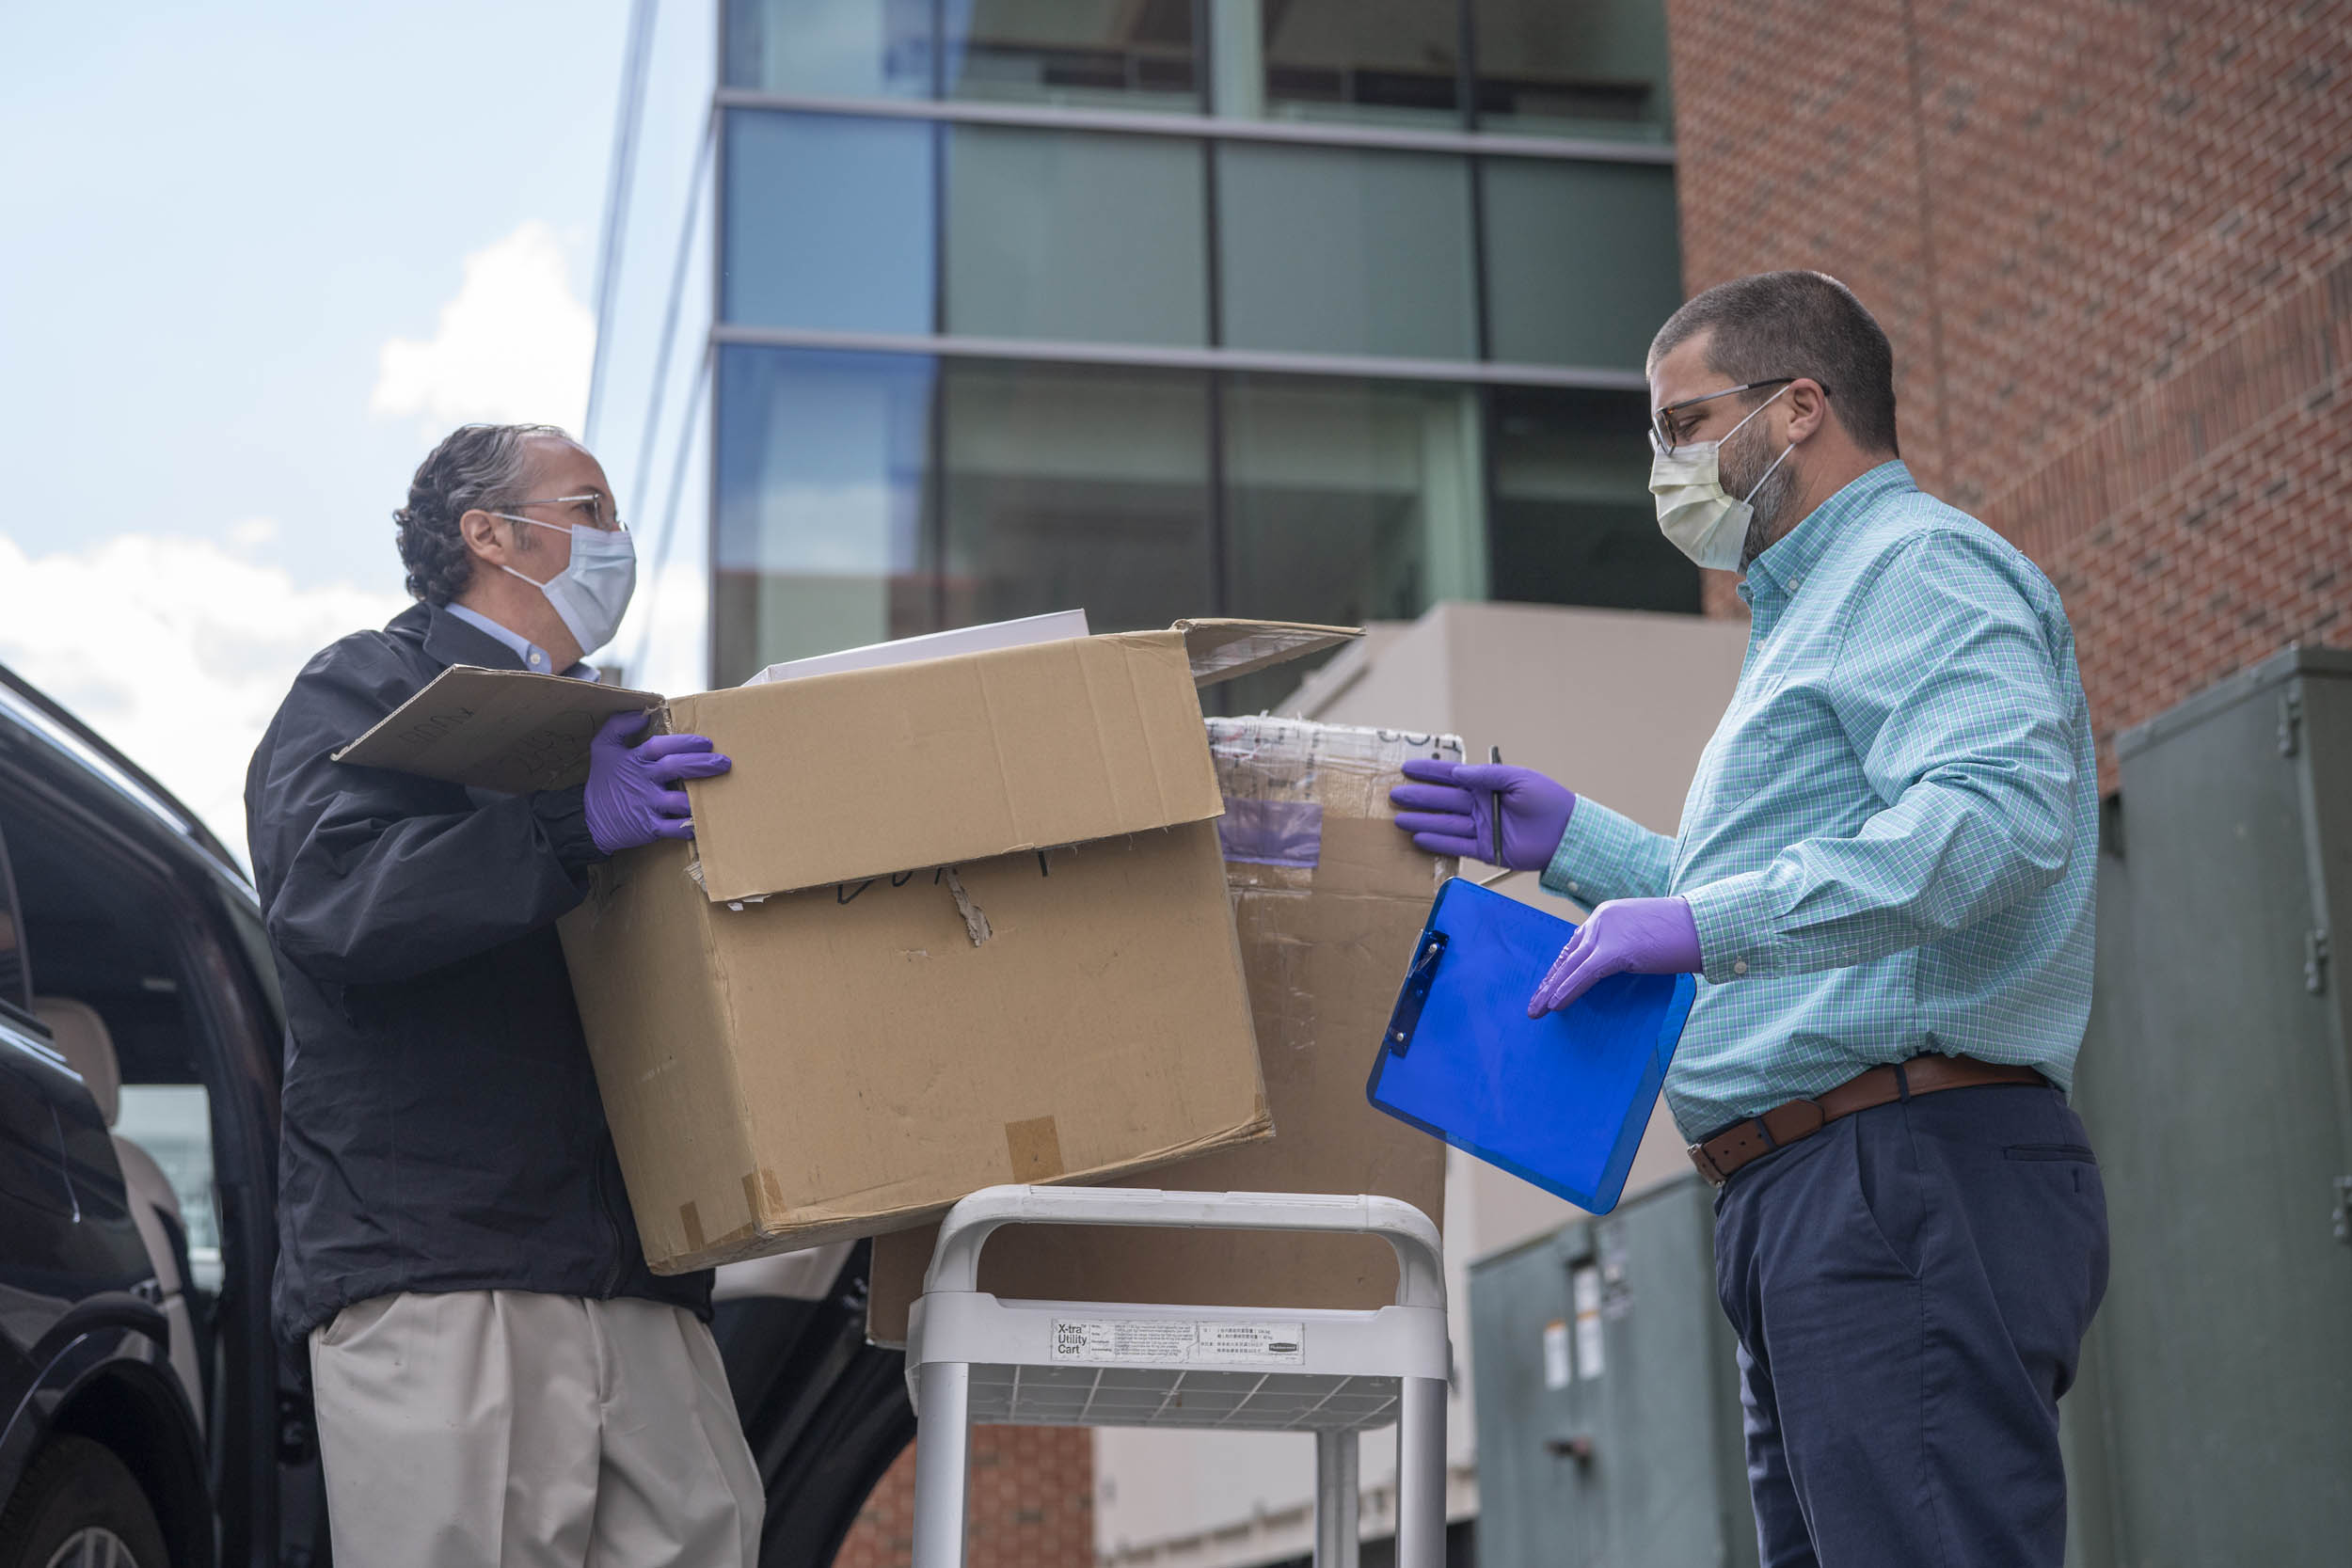 Two men placing cardboard boxes on a trolly.  One man (left) is getting the boxes out of the car the man (right) is watching as he holds a clipboard